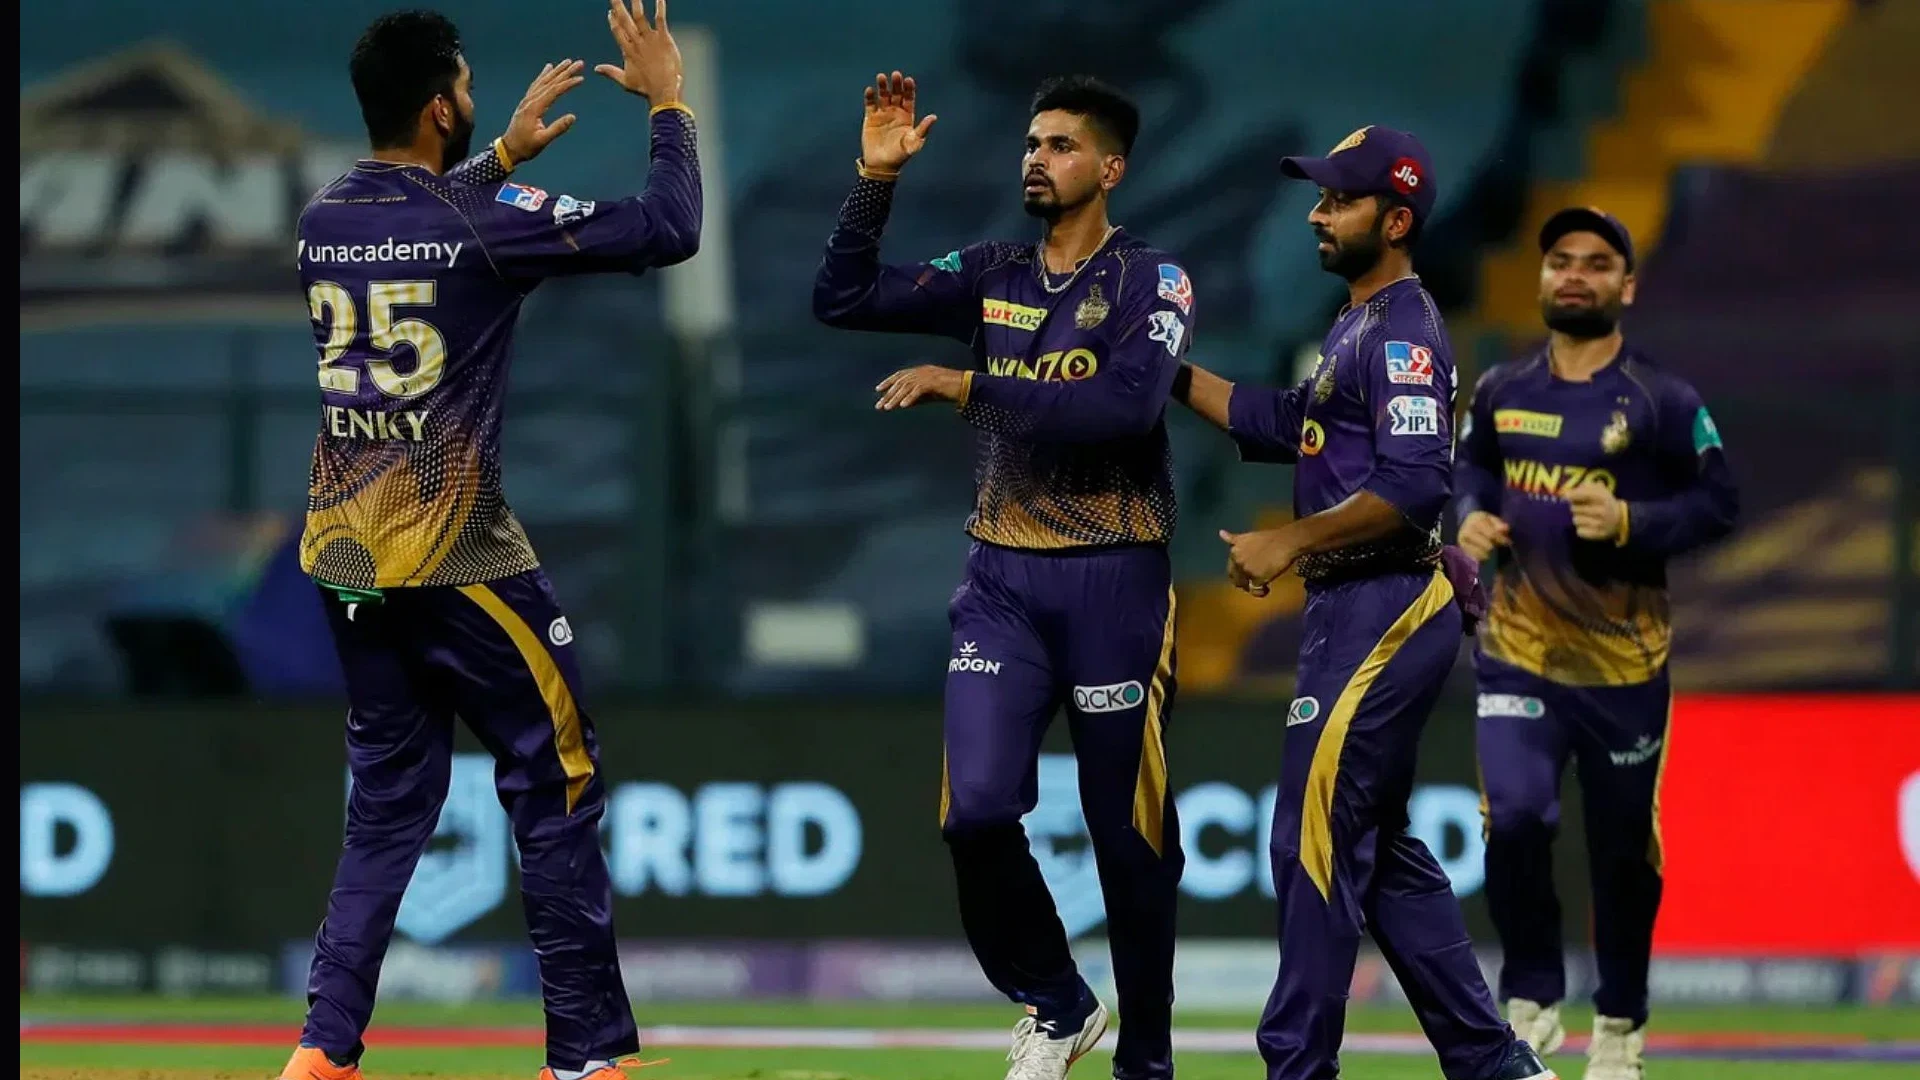 Seems like they have no idea of what they are doing” – Aakash Chopra on KKR’s random strategy in IPL 2022